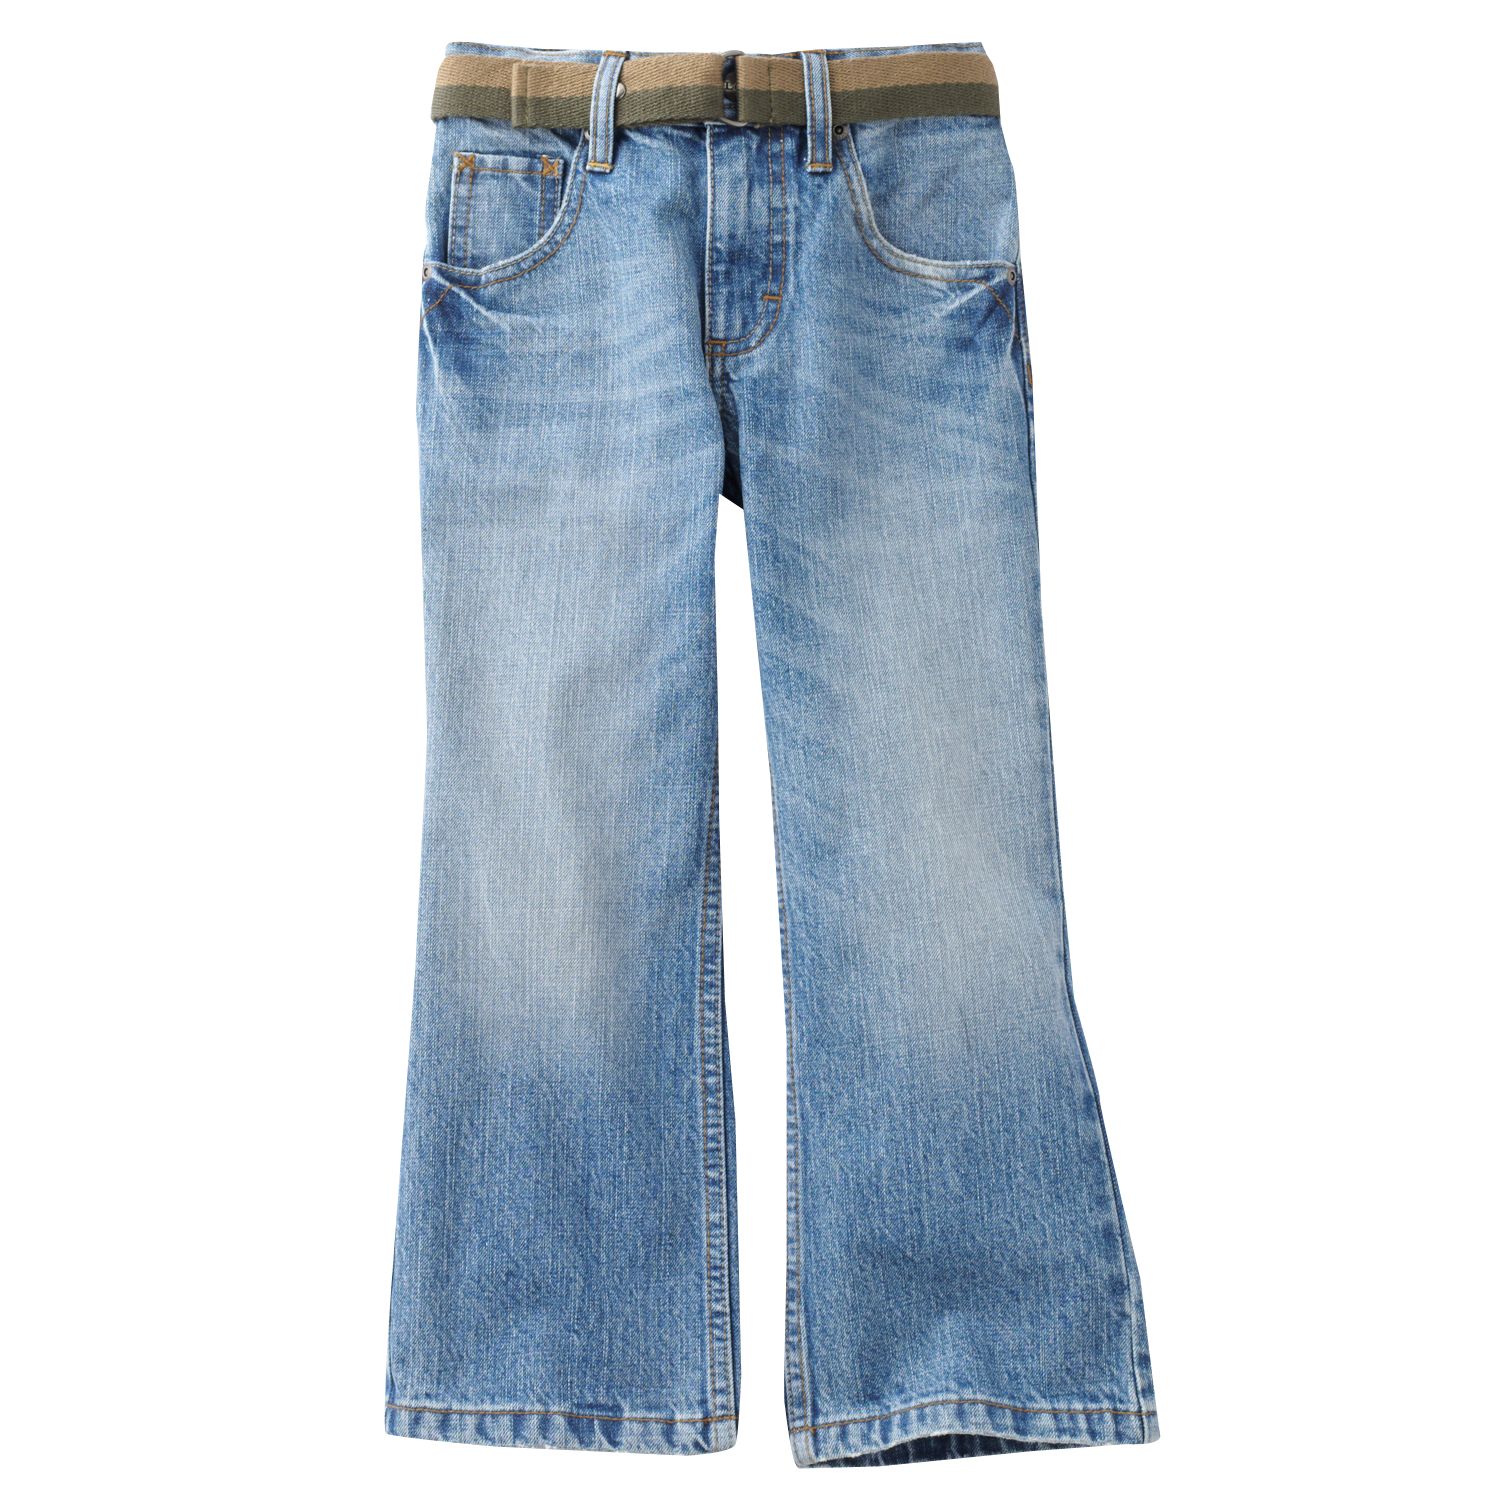 lee dungarees relaxed bootcut